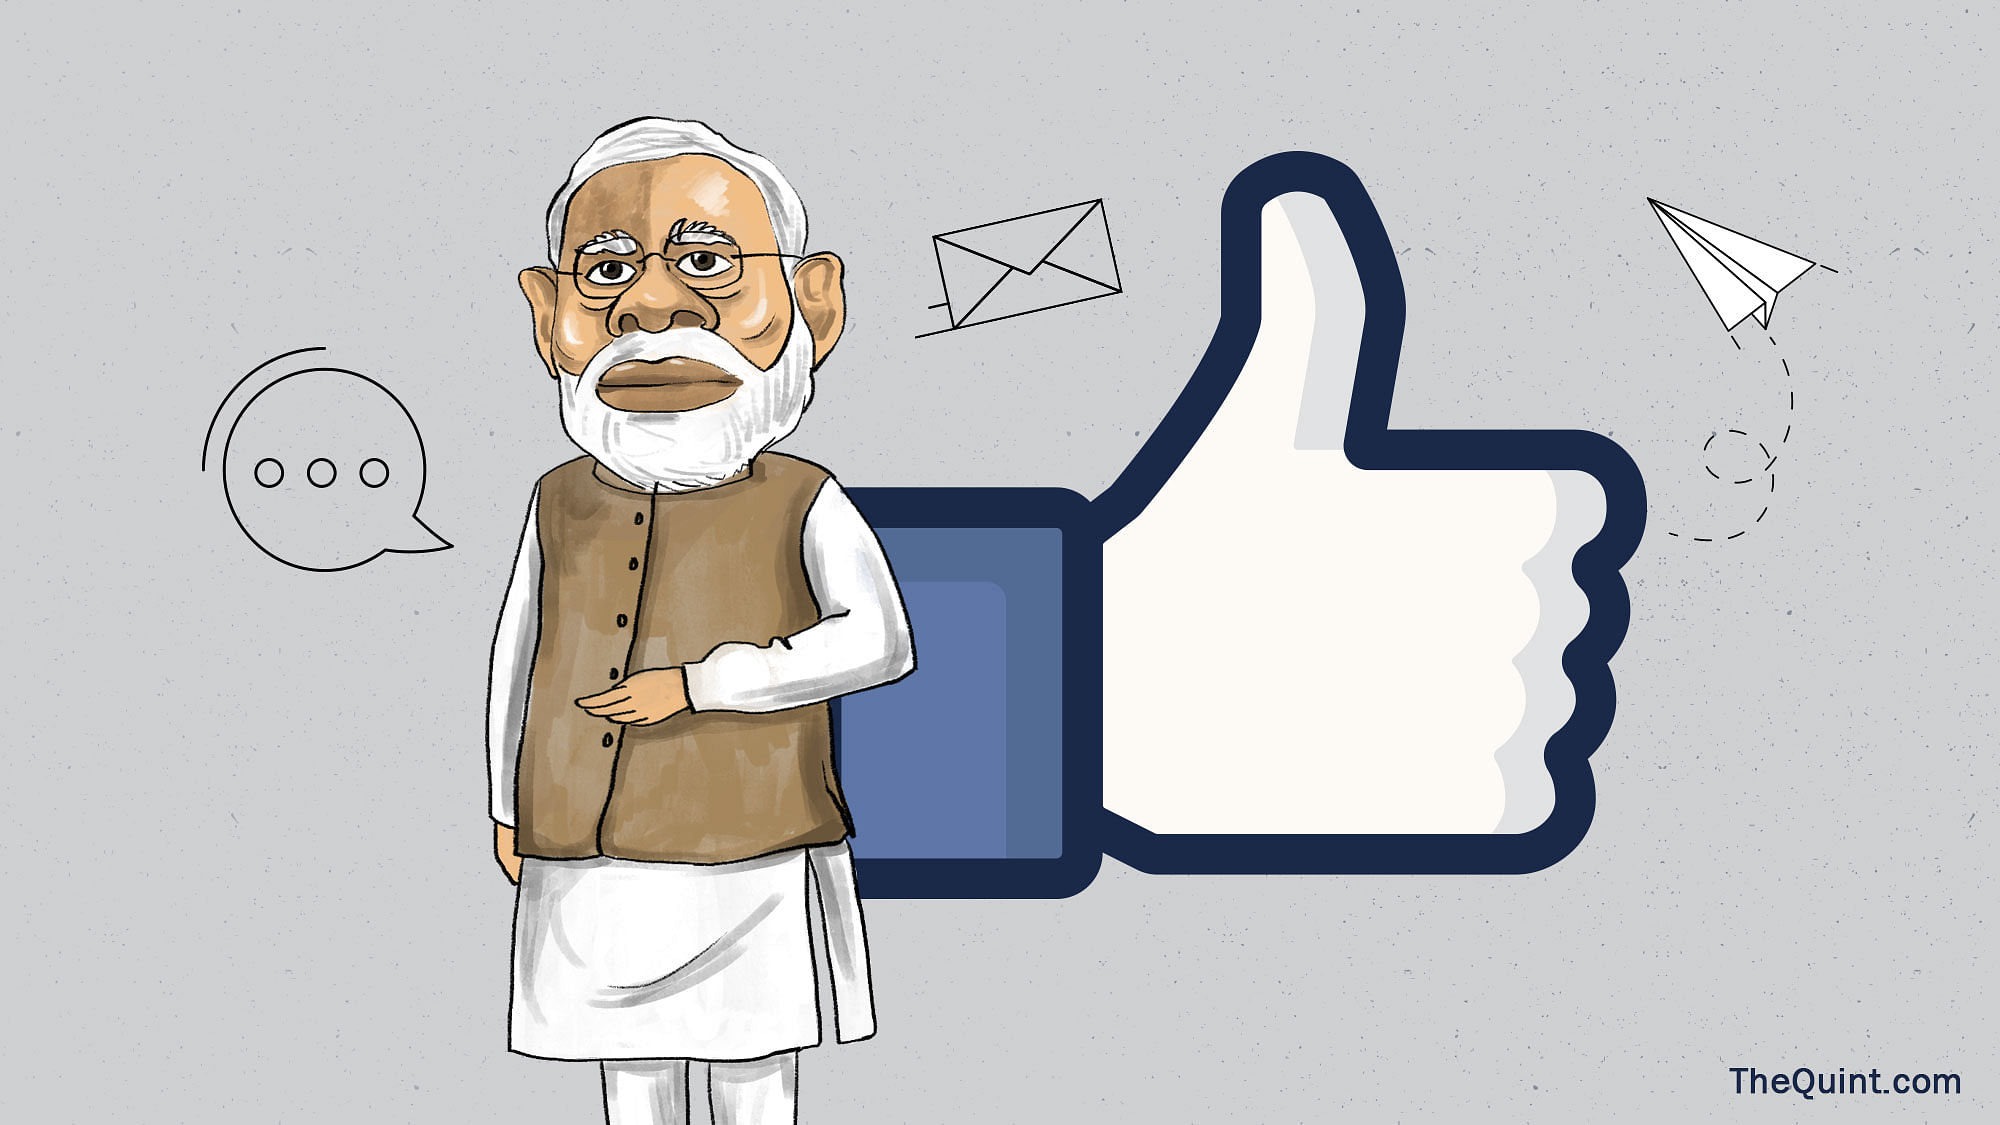 Not surprisingly, PM Modi is the most popular Indian political leader on Facebook, with 40 million likes on his page. (Photo: <b>The Quint</b>)